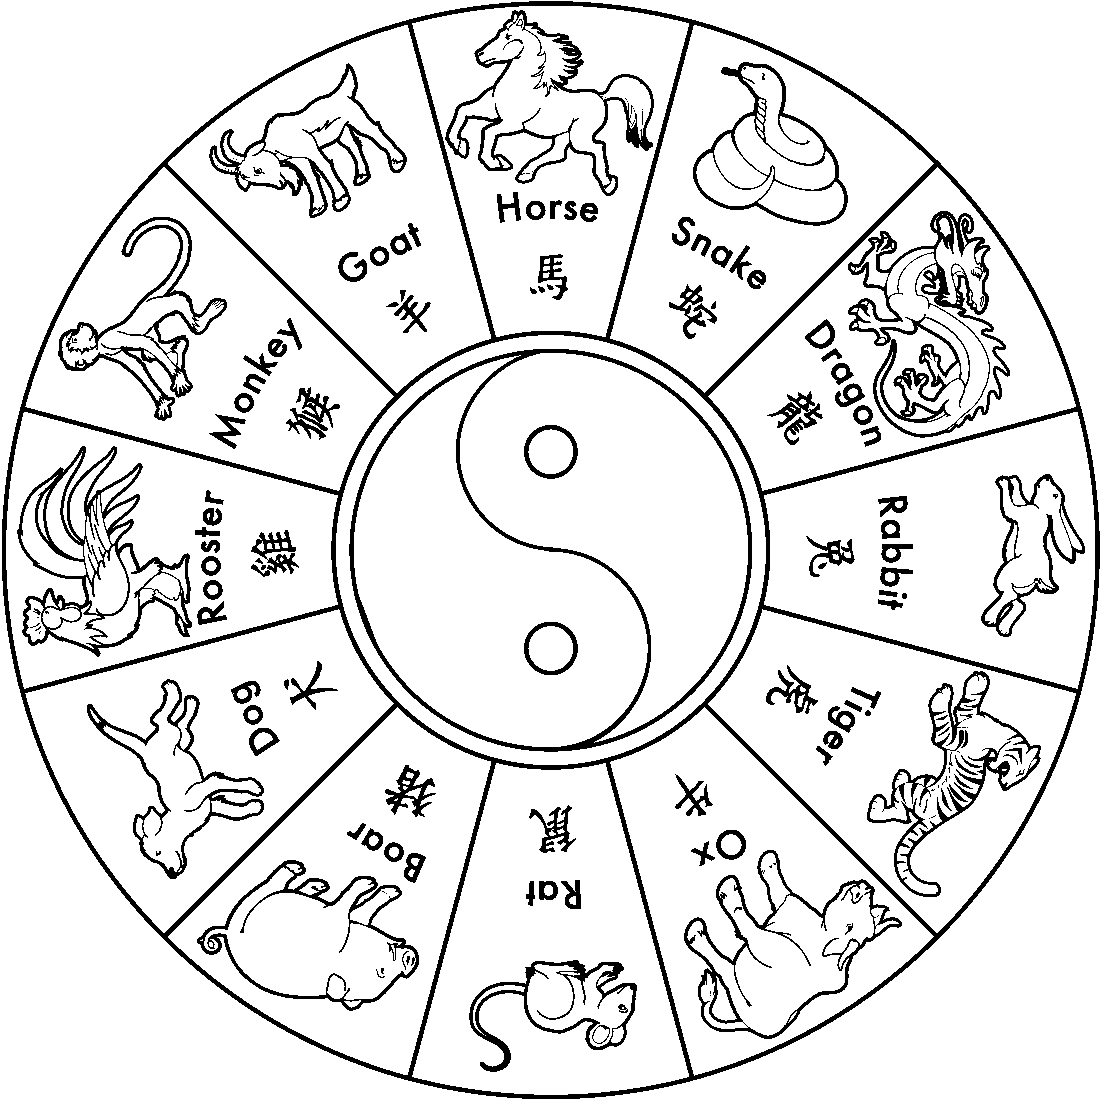 free-chinese-zodiac-coloring-pages-download-free-chinese-zodiac-coloring-pages-png-images-free